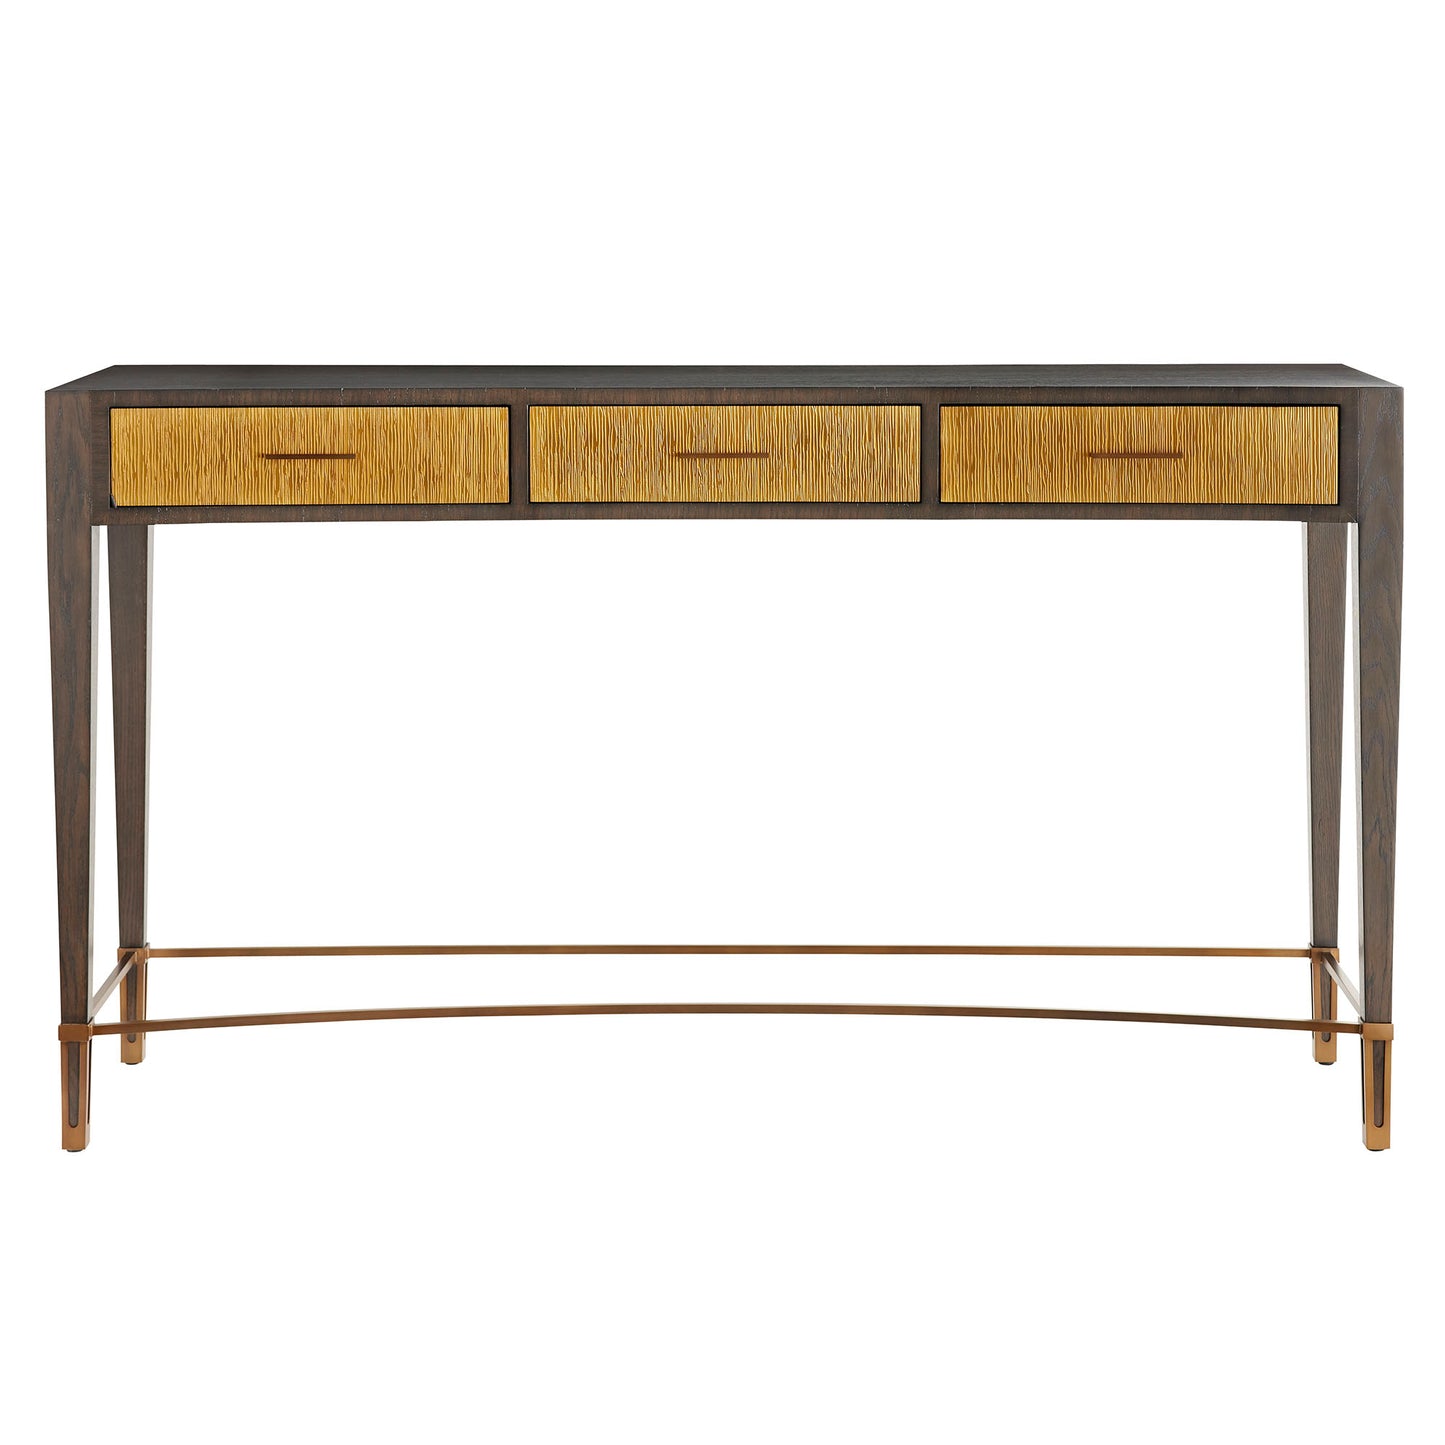 Lancaster Console - Ebony Toned Oak Veneer with Antique Brass Clad Drawer Fronts